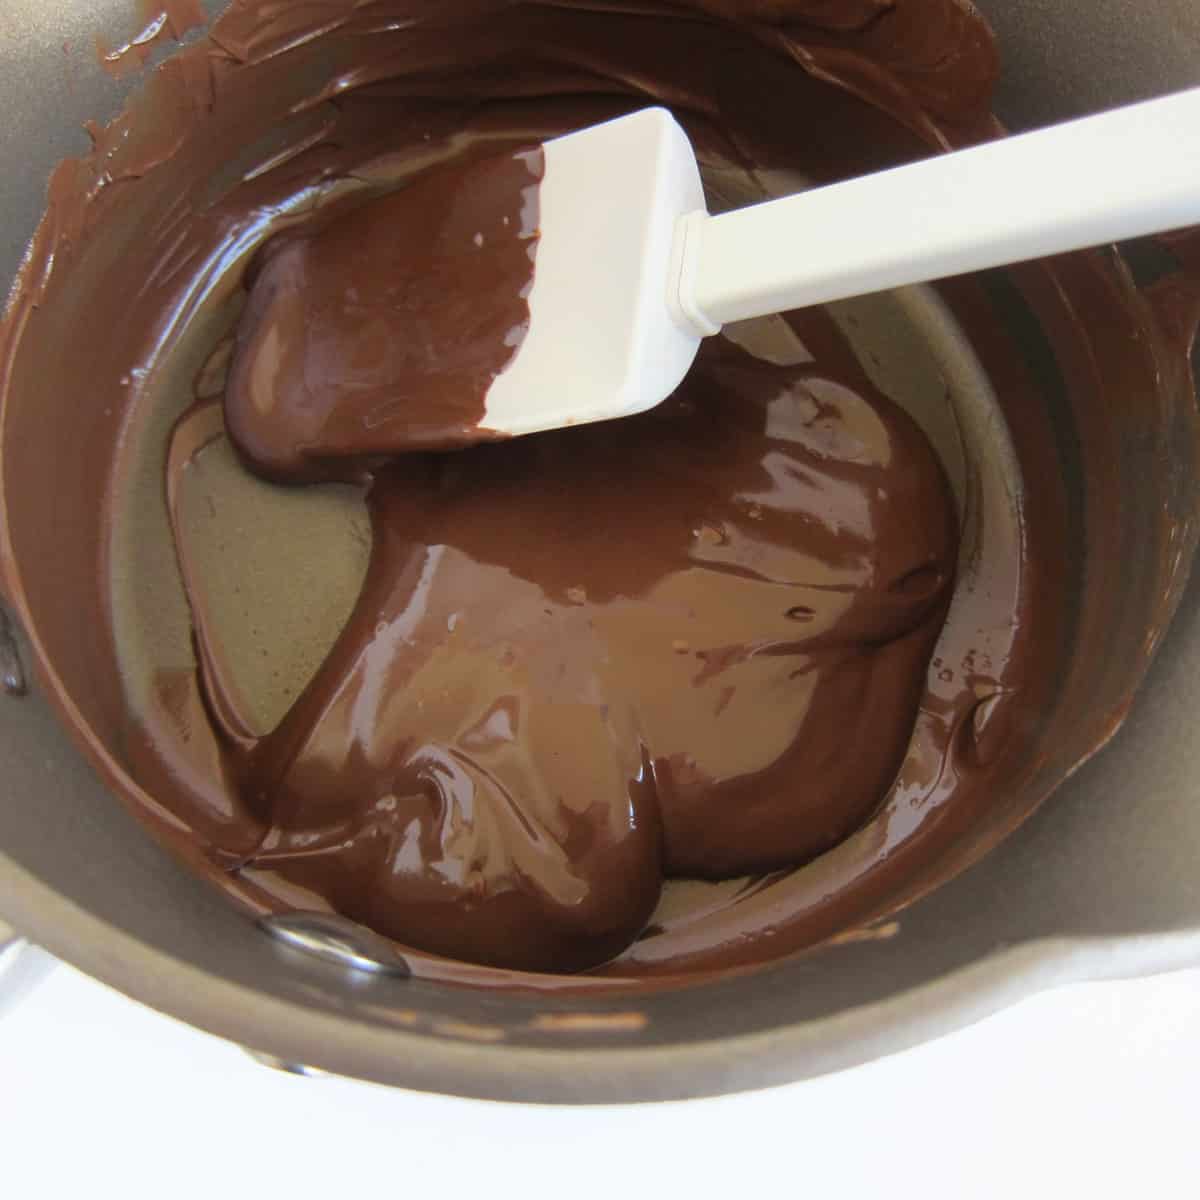 melted chocolate and Nutella in a saucepan with a silicone spatula